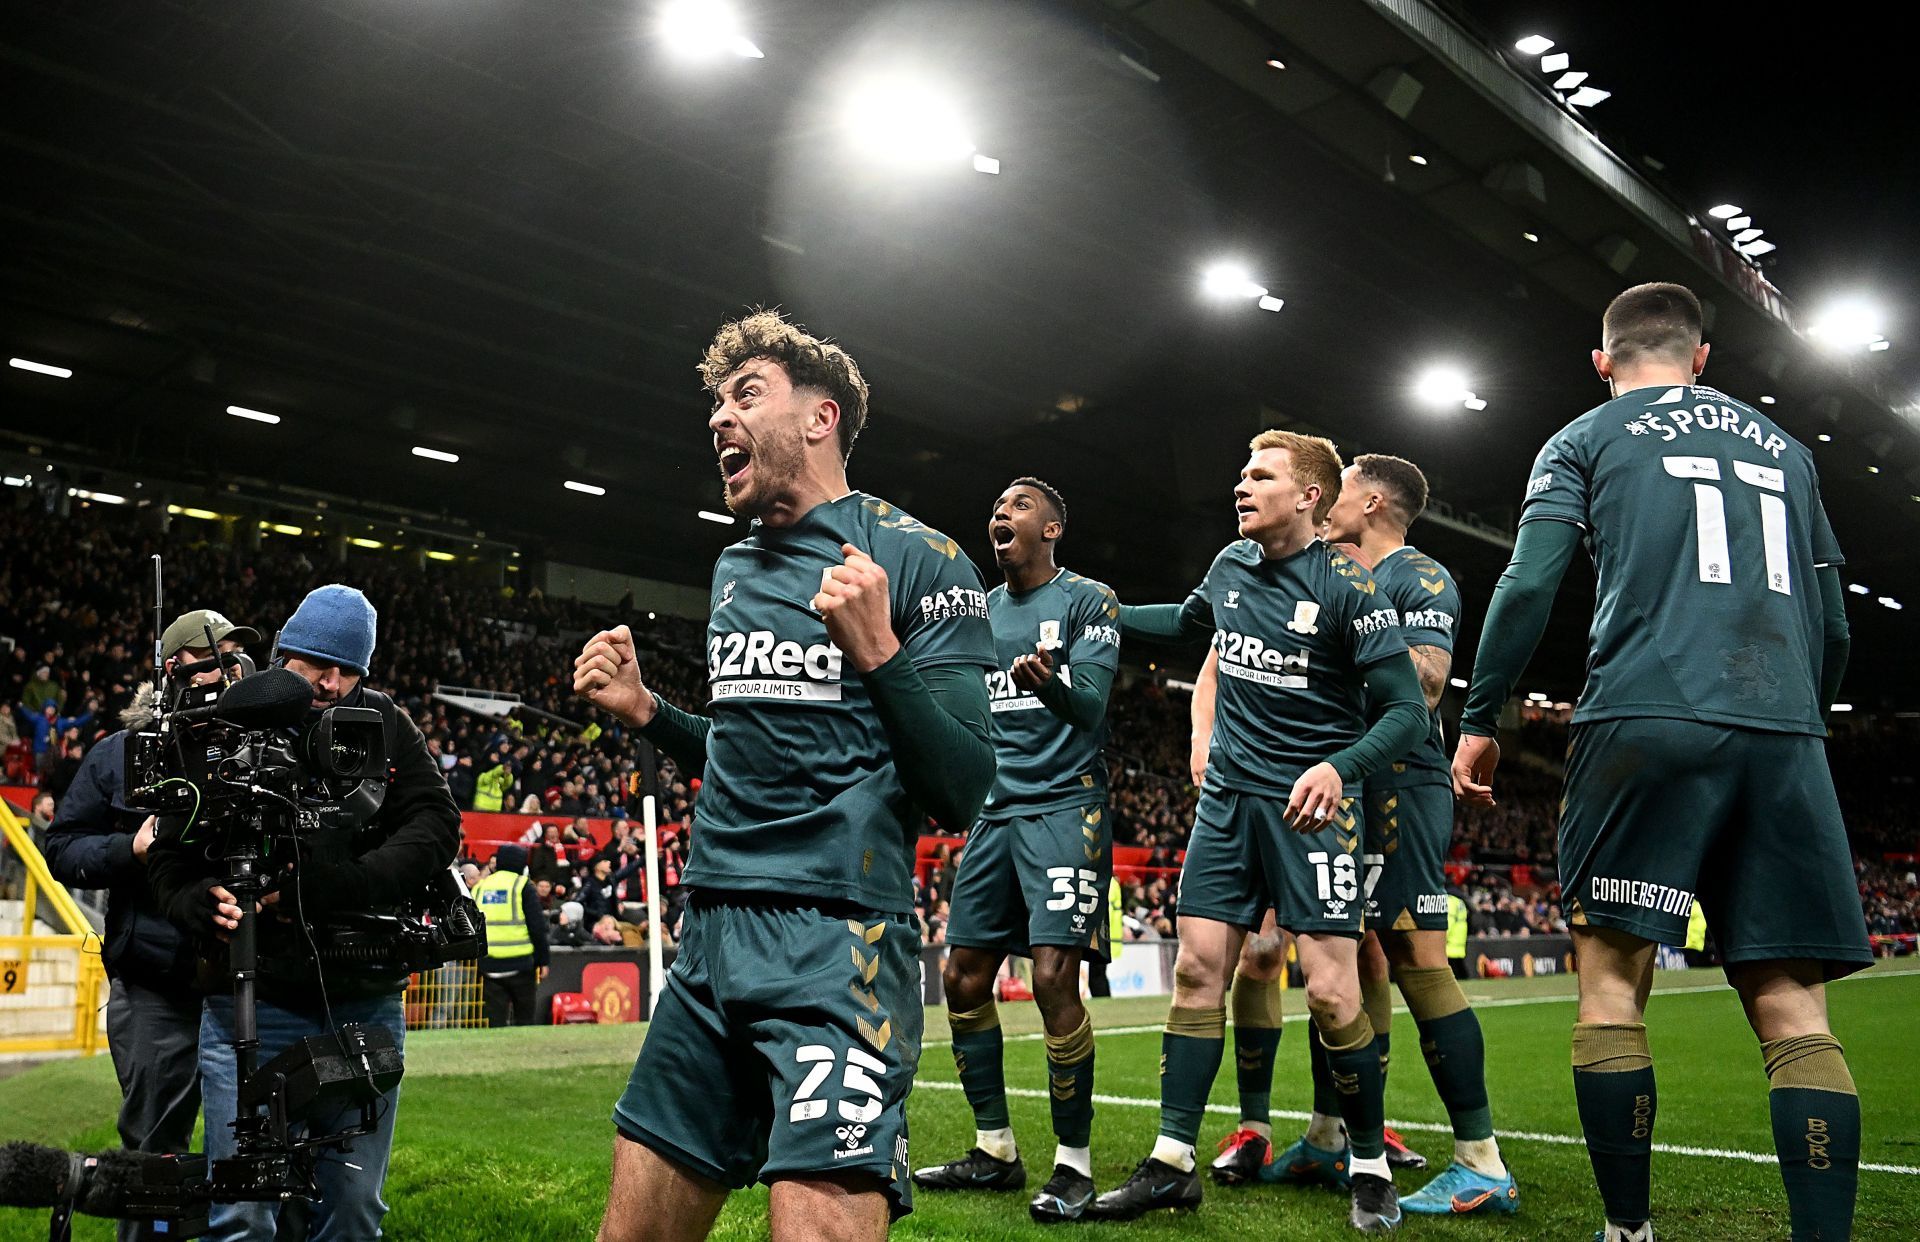 Middlesbrough will want to continue their momentum